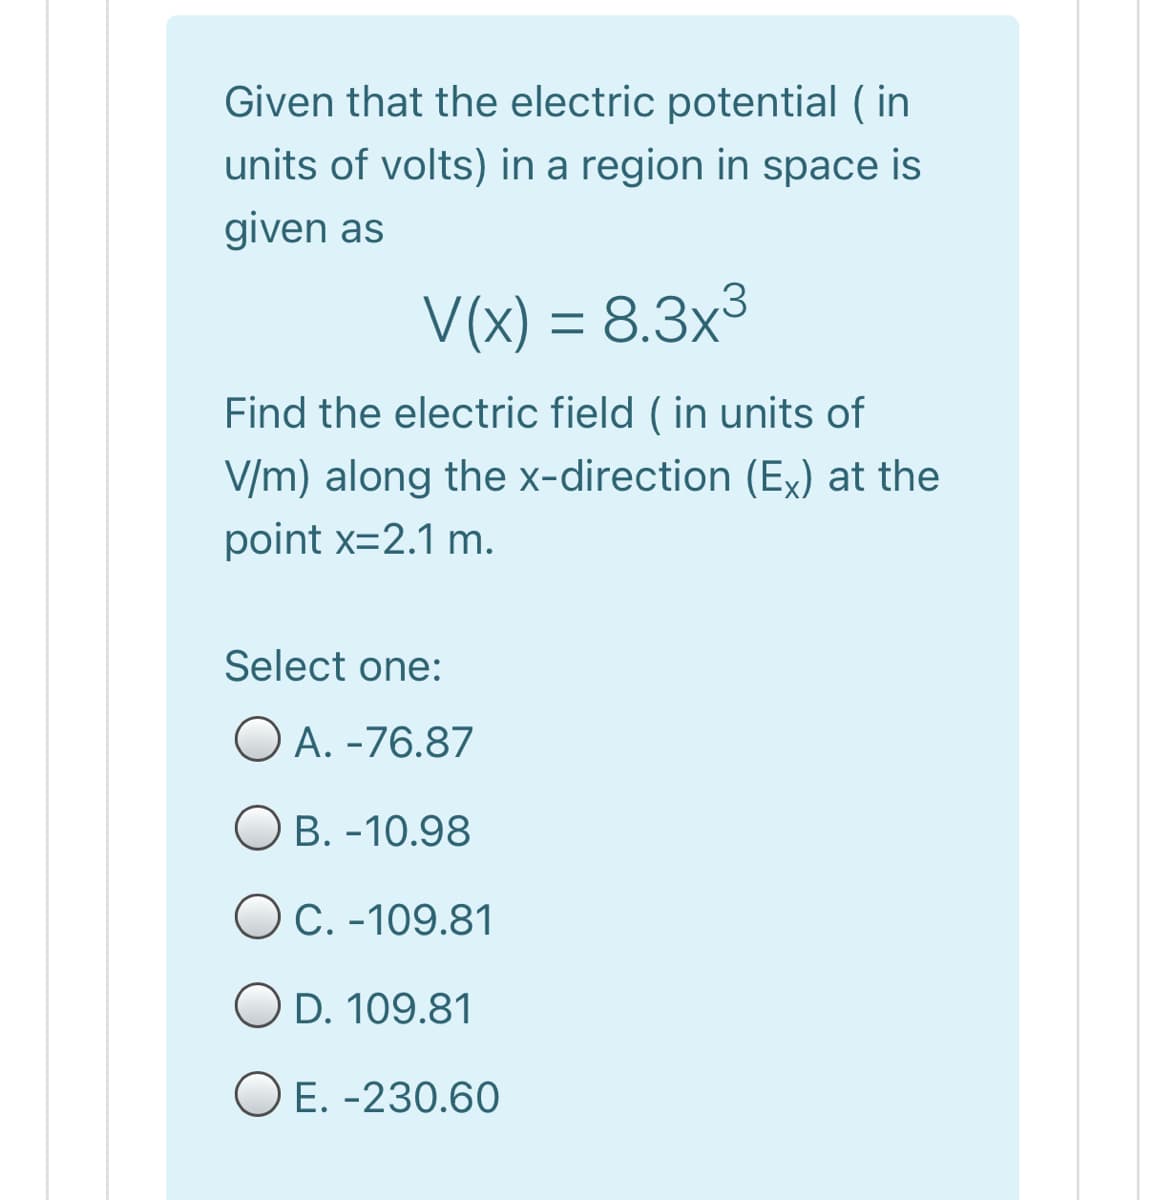 Given that the electric potential ( in
units of volts) in a region in space is
given as
V(x) = 8.3x3
Find the electric field ( in units of
V/m) along the x-direction (Ex) at the
point x=2.1 m.
Select one:
O A. -76.87
B. -10.98
OC. -109.81
O D. 109.81
O E. -230.60
